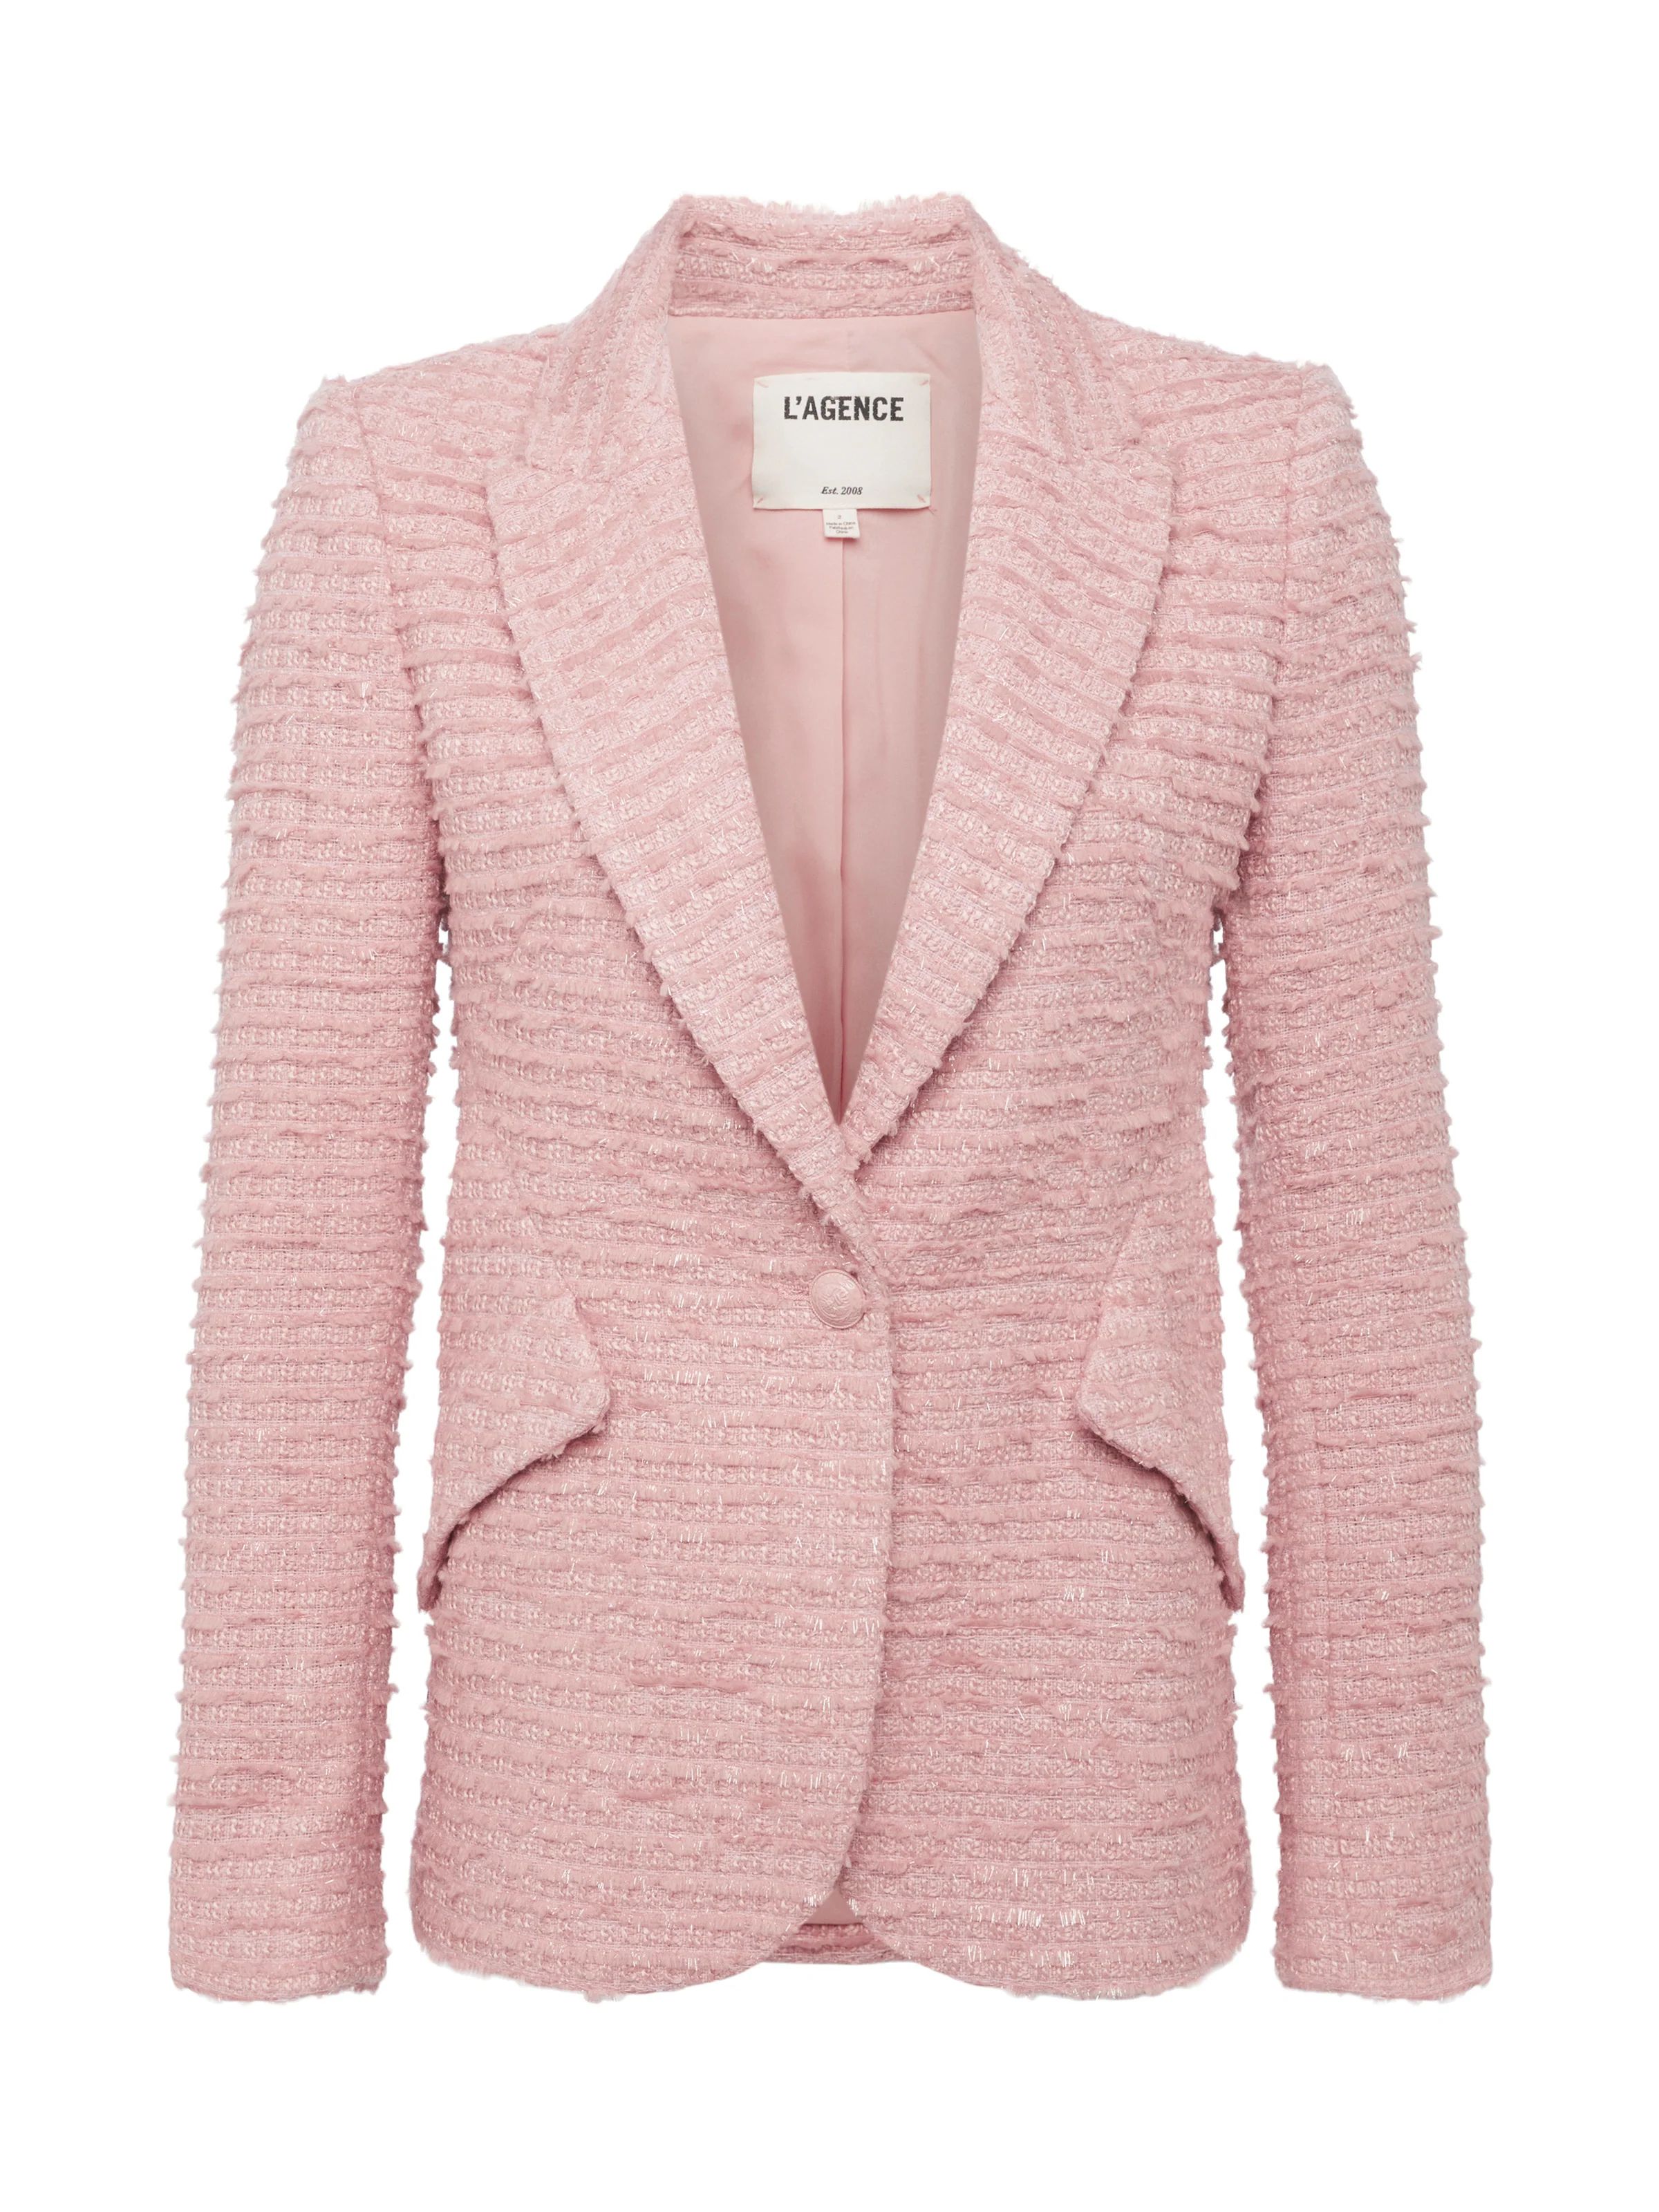 L'AGENCE Chamberlain Tweed Blazer In Dusty Pink | L'Agence